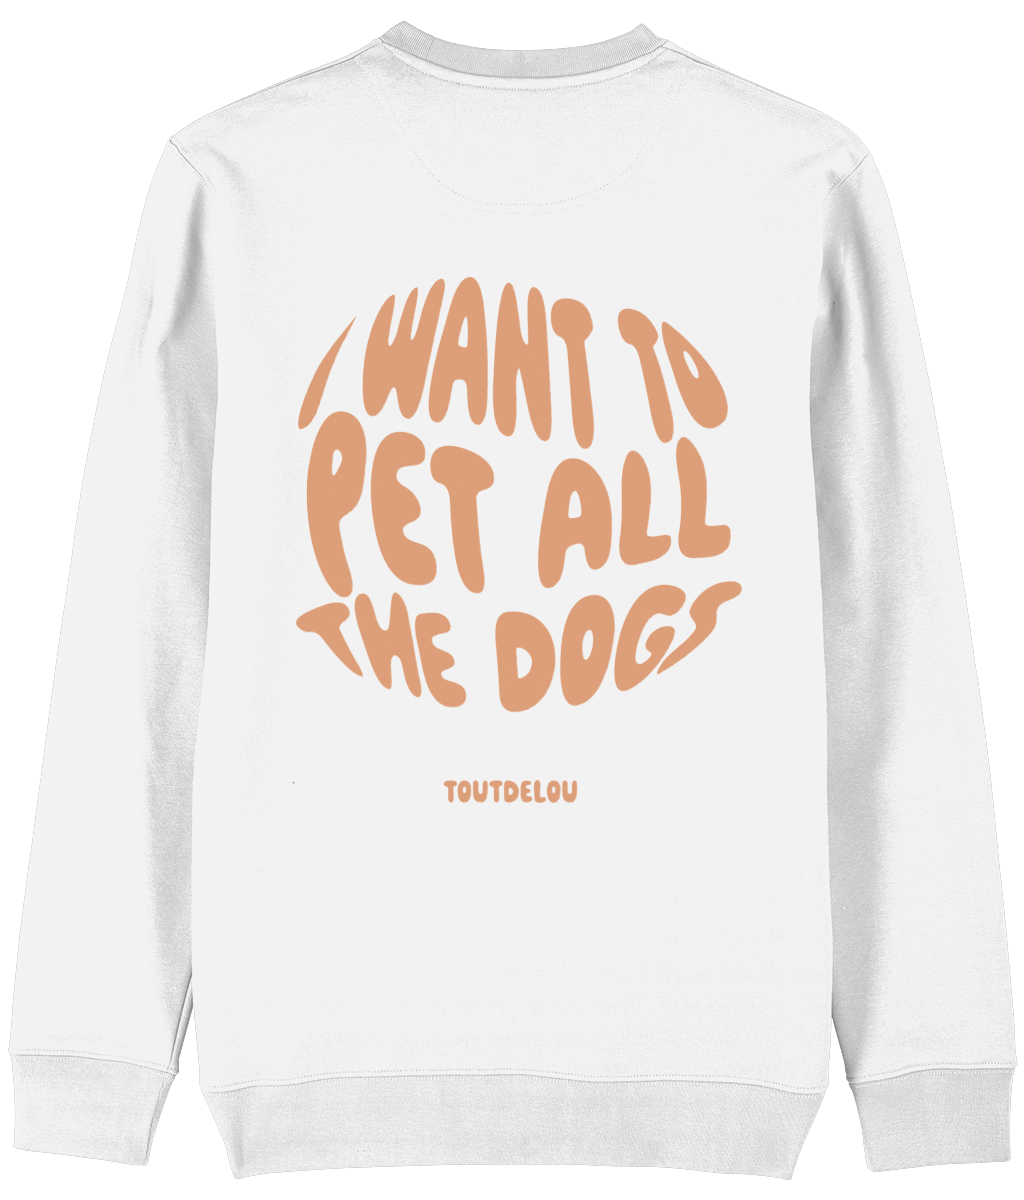 Sweater - pet all the dogs - peach - print on back